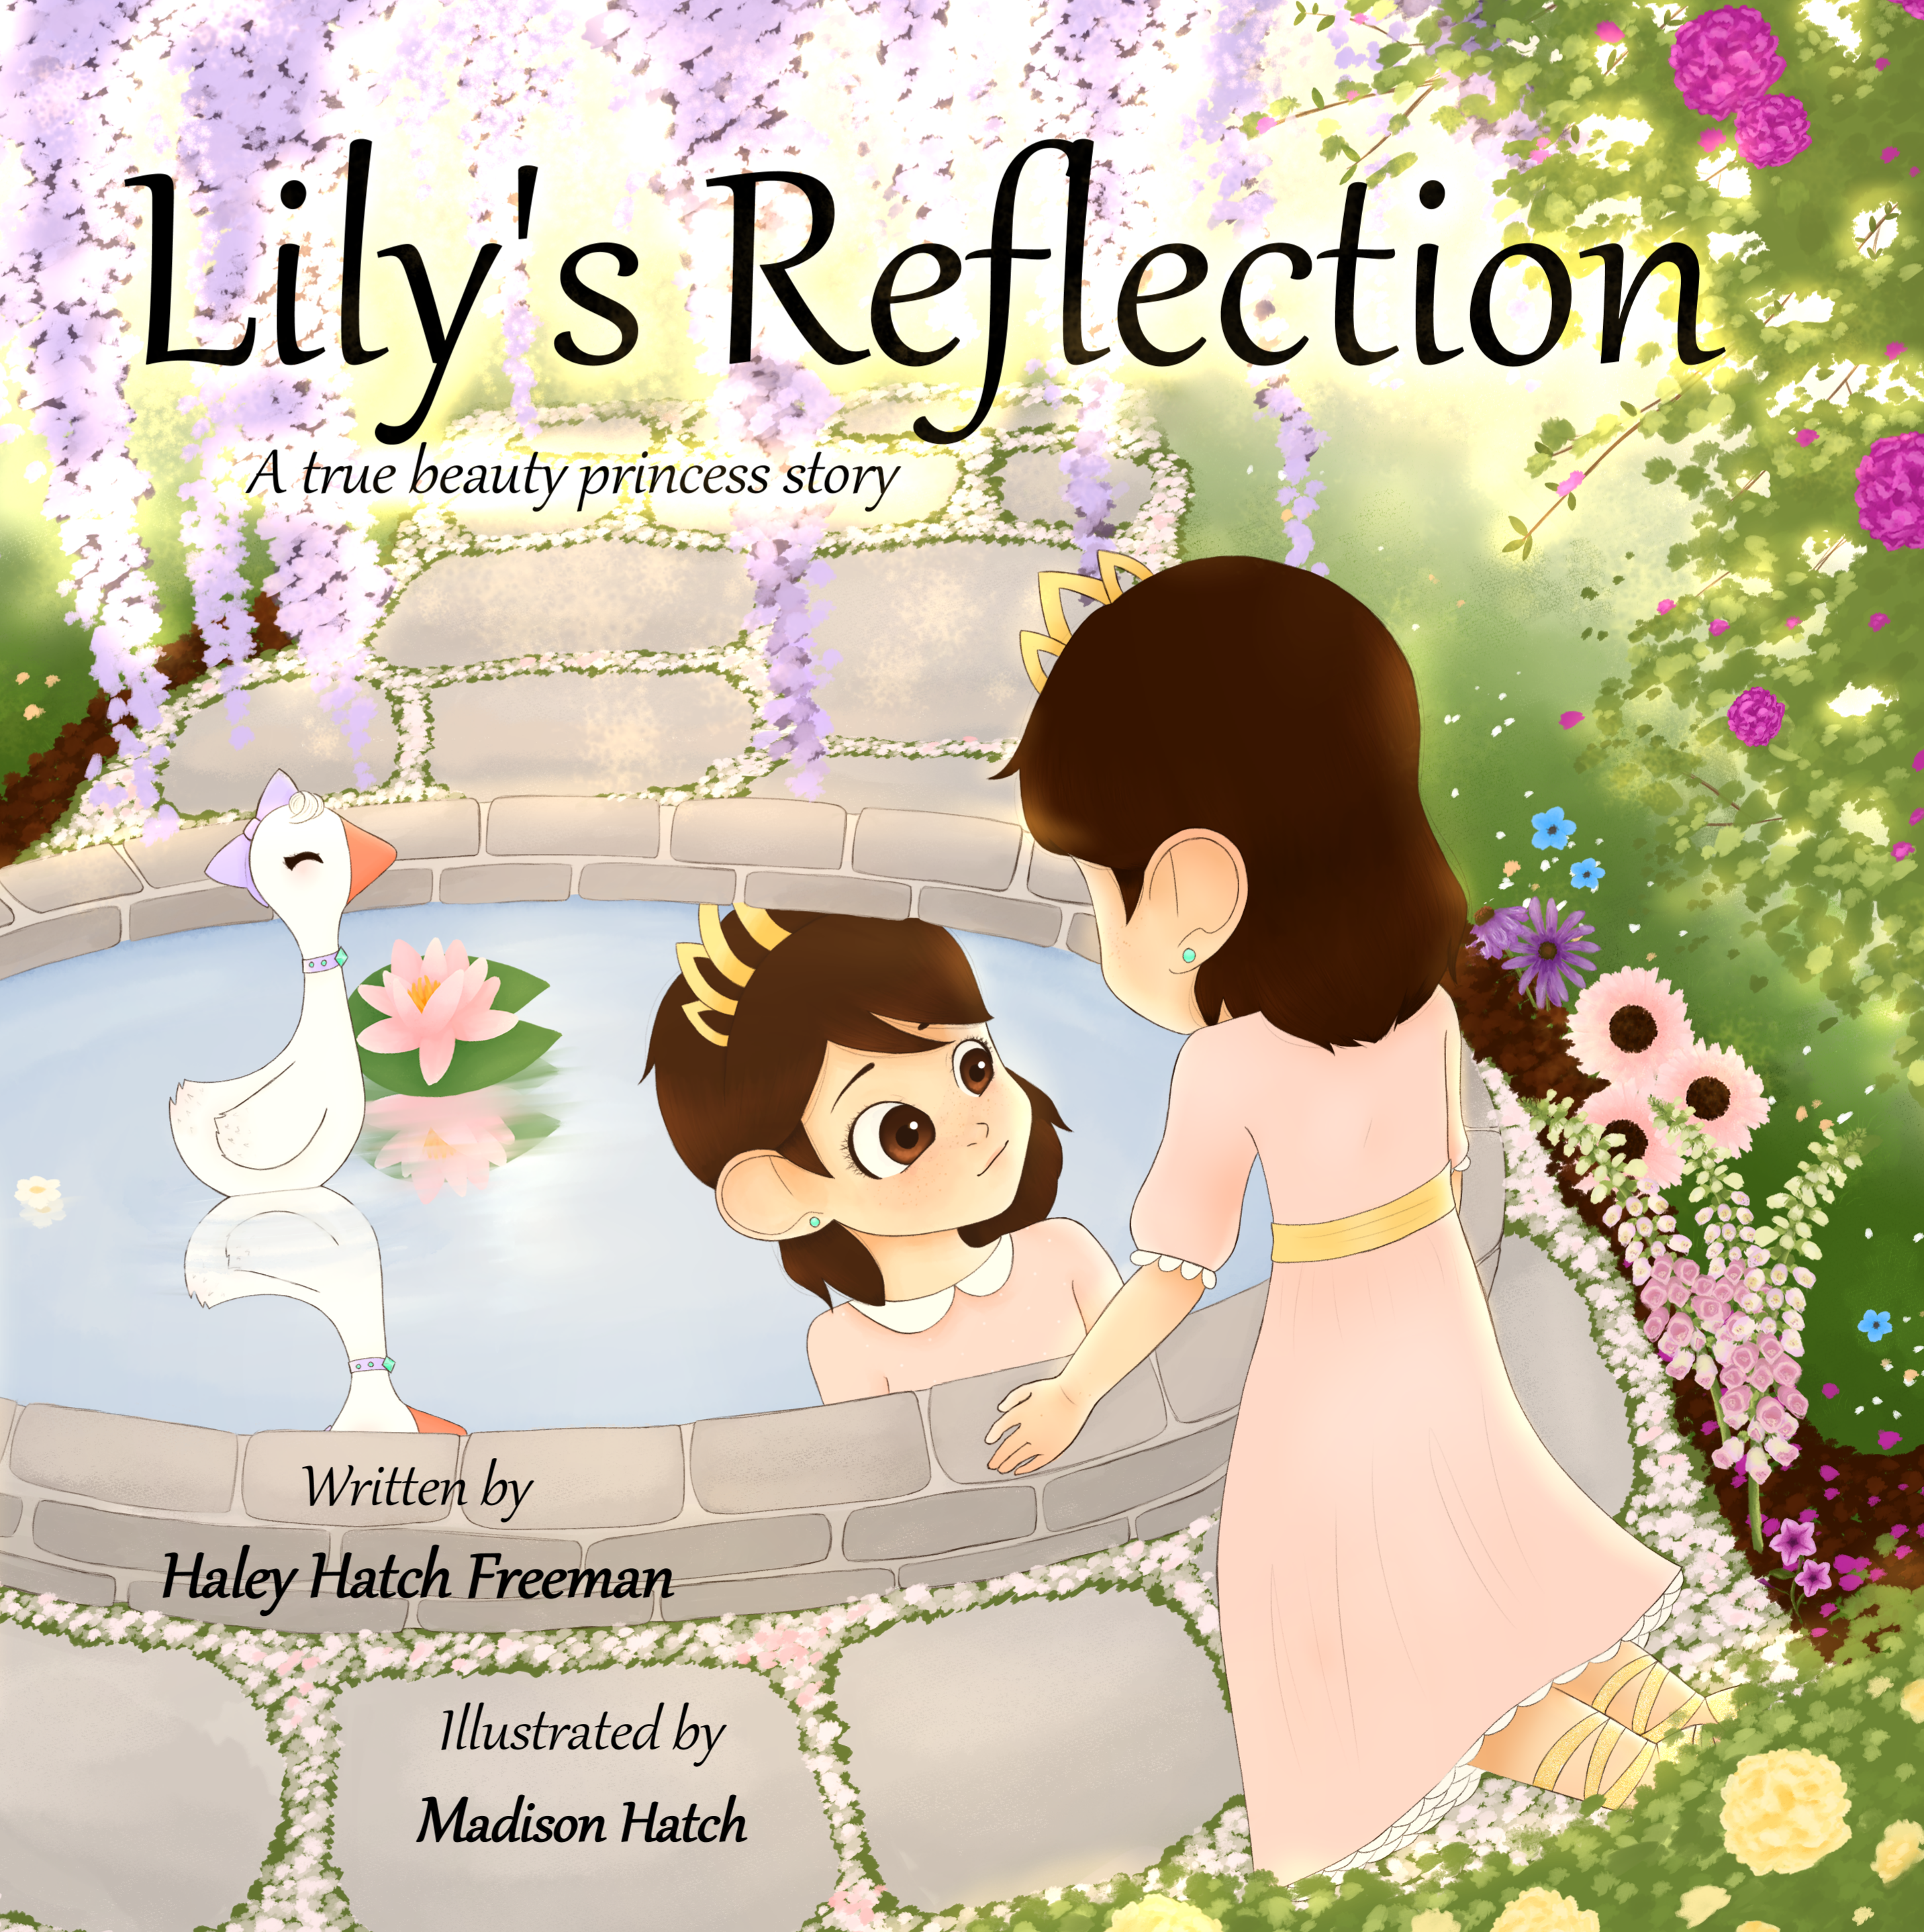 A Lily's Reflection